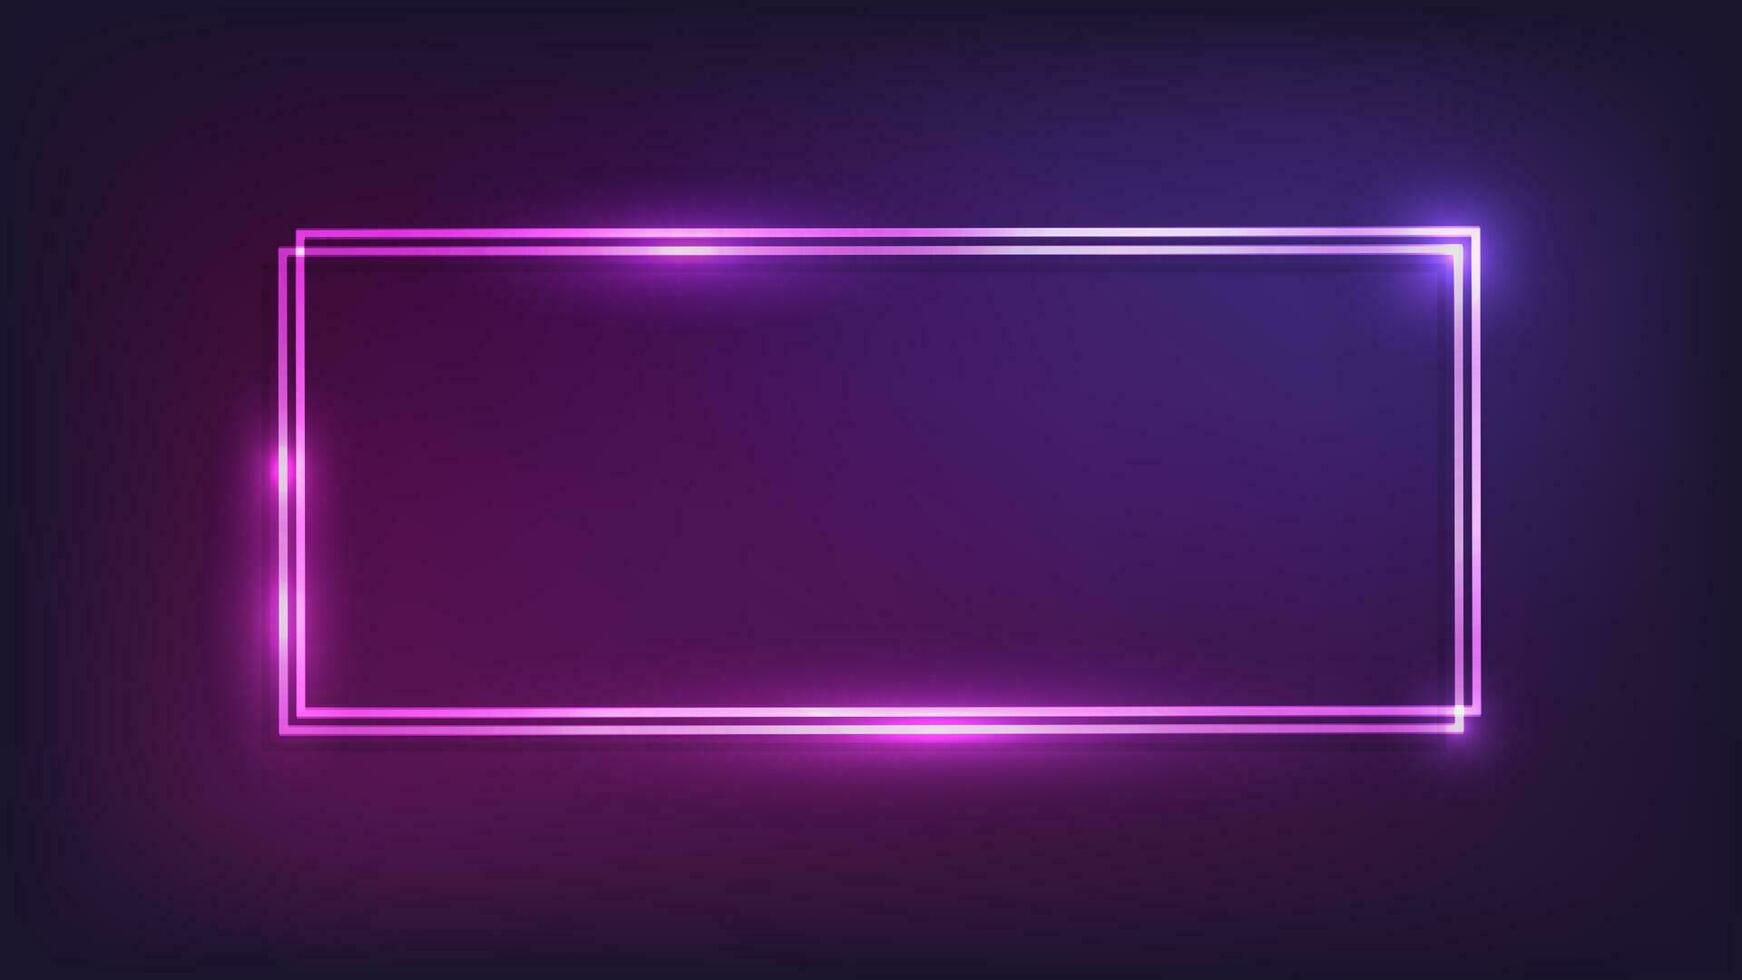 Neon double rectangular frame with shining effects on dark background. Empty glowing techno backdrop. Vector illustration.